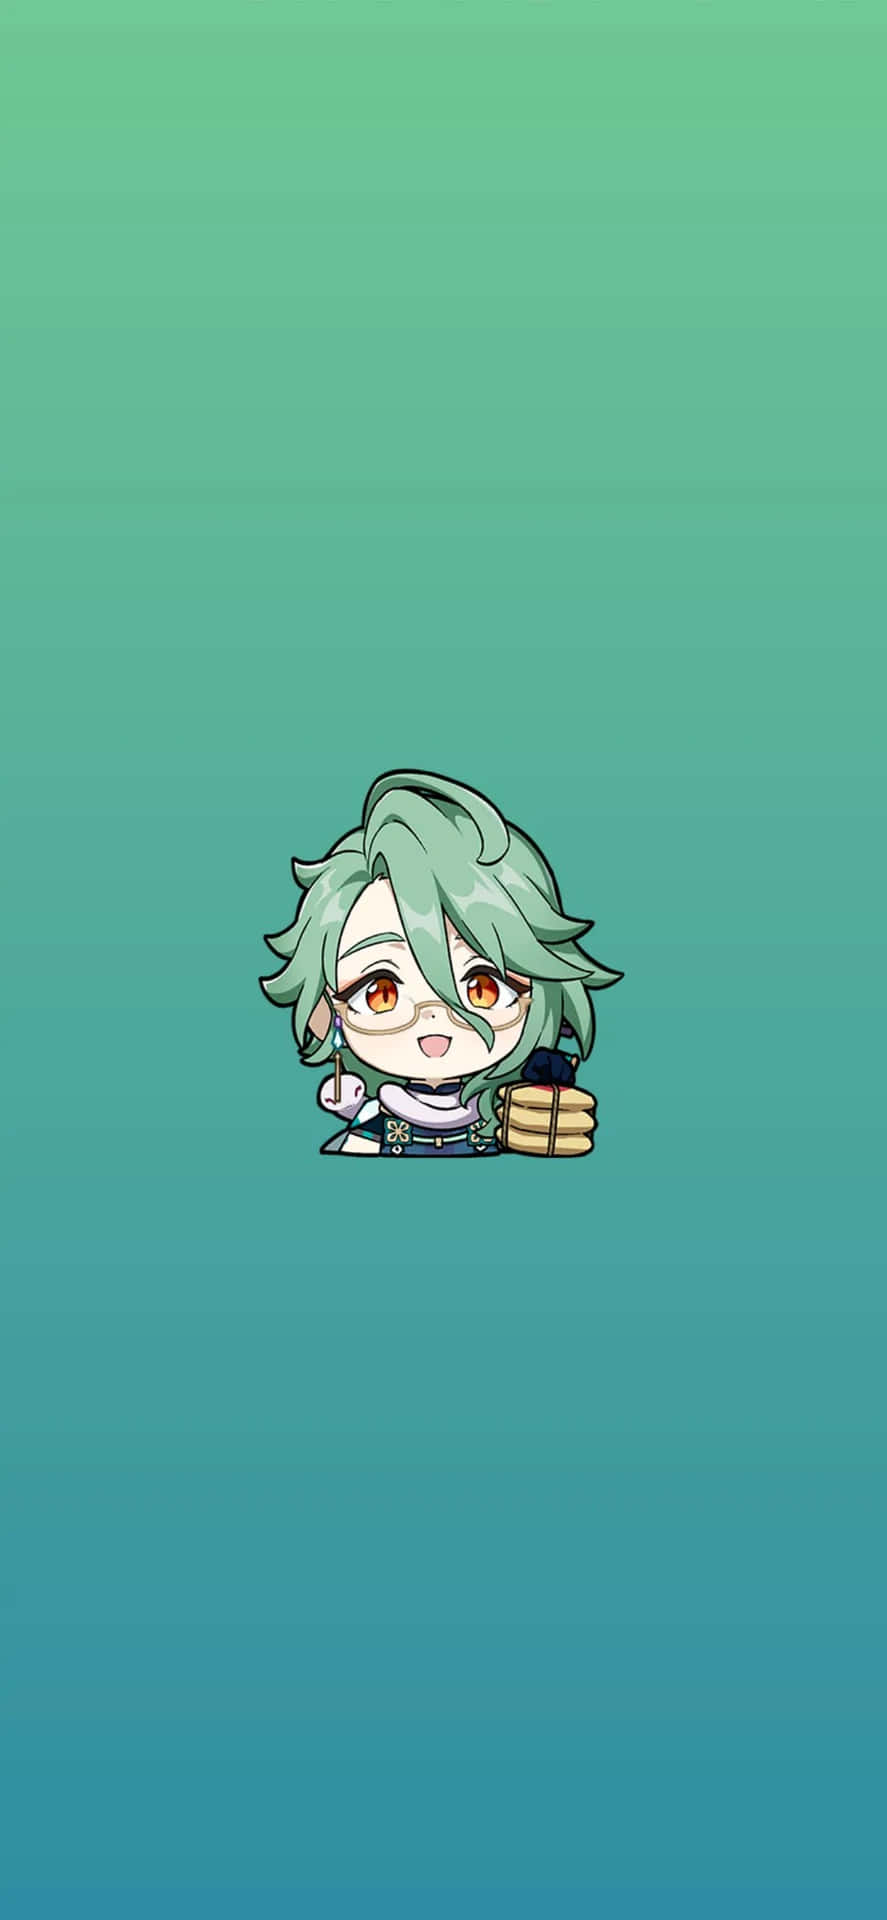 Chibi Style Character Green Background Wallpaper